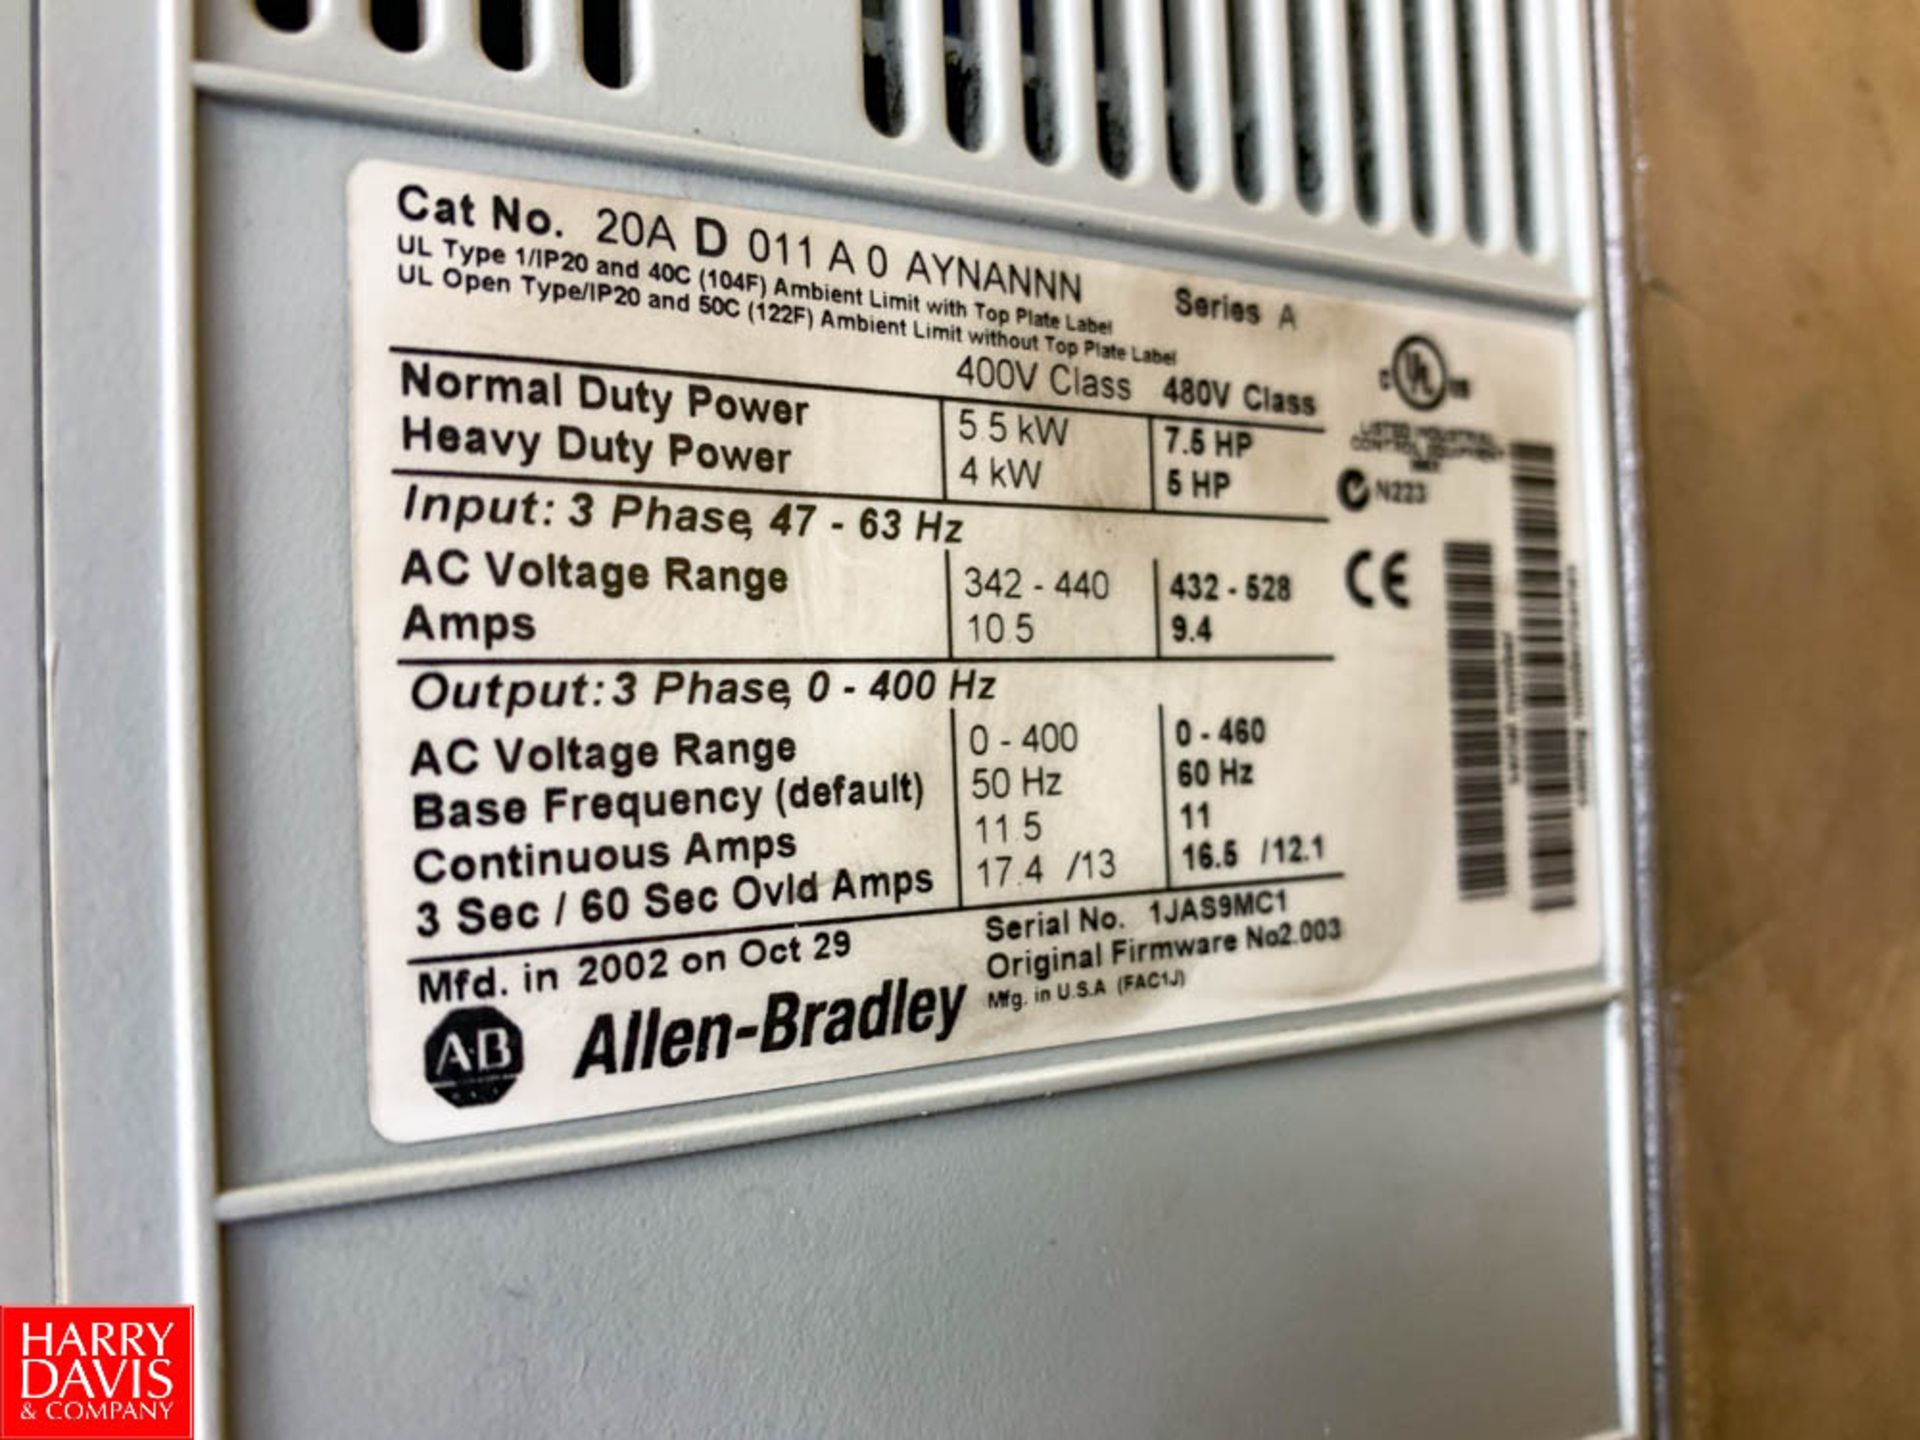 Allen Bradley 7.5 HP Powerflex 70 Variable Frequency Drive Rigging Fee:$25 - Image 2 of 2